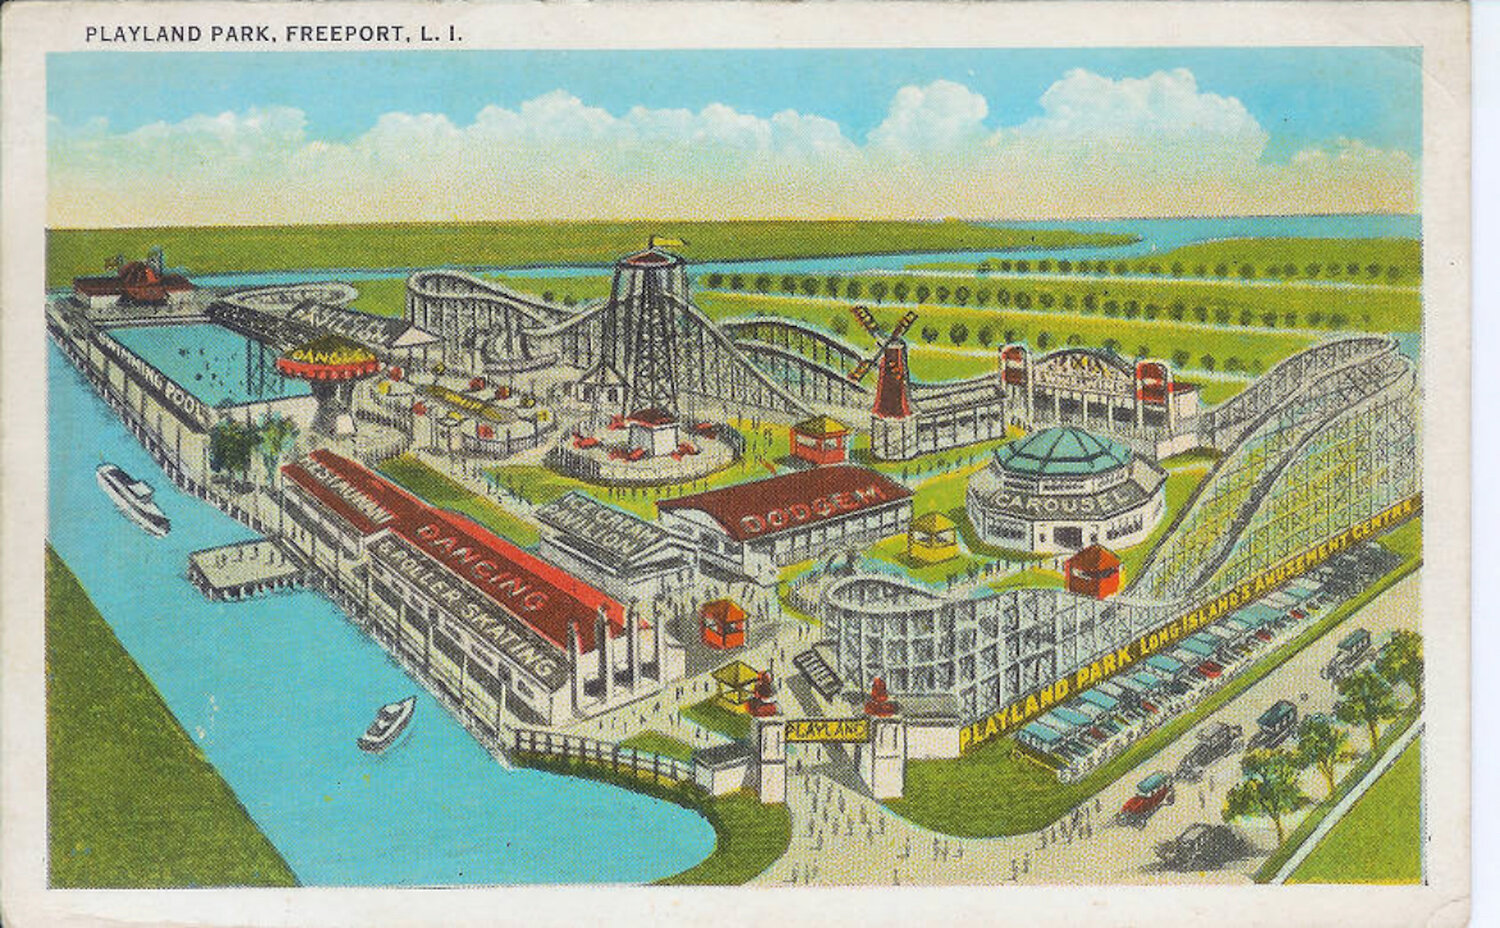 A colorized postcard of Playland Park in Freeport, which captivated visitors with its enchanting amusement park atmosphere reminiscent of Coney Island. This amusement park, situated on a nine-acre site, sat in the southeastern area of Front and South Grove Streets.